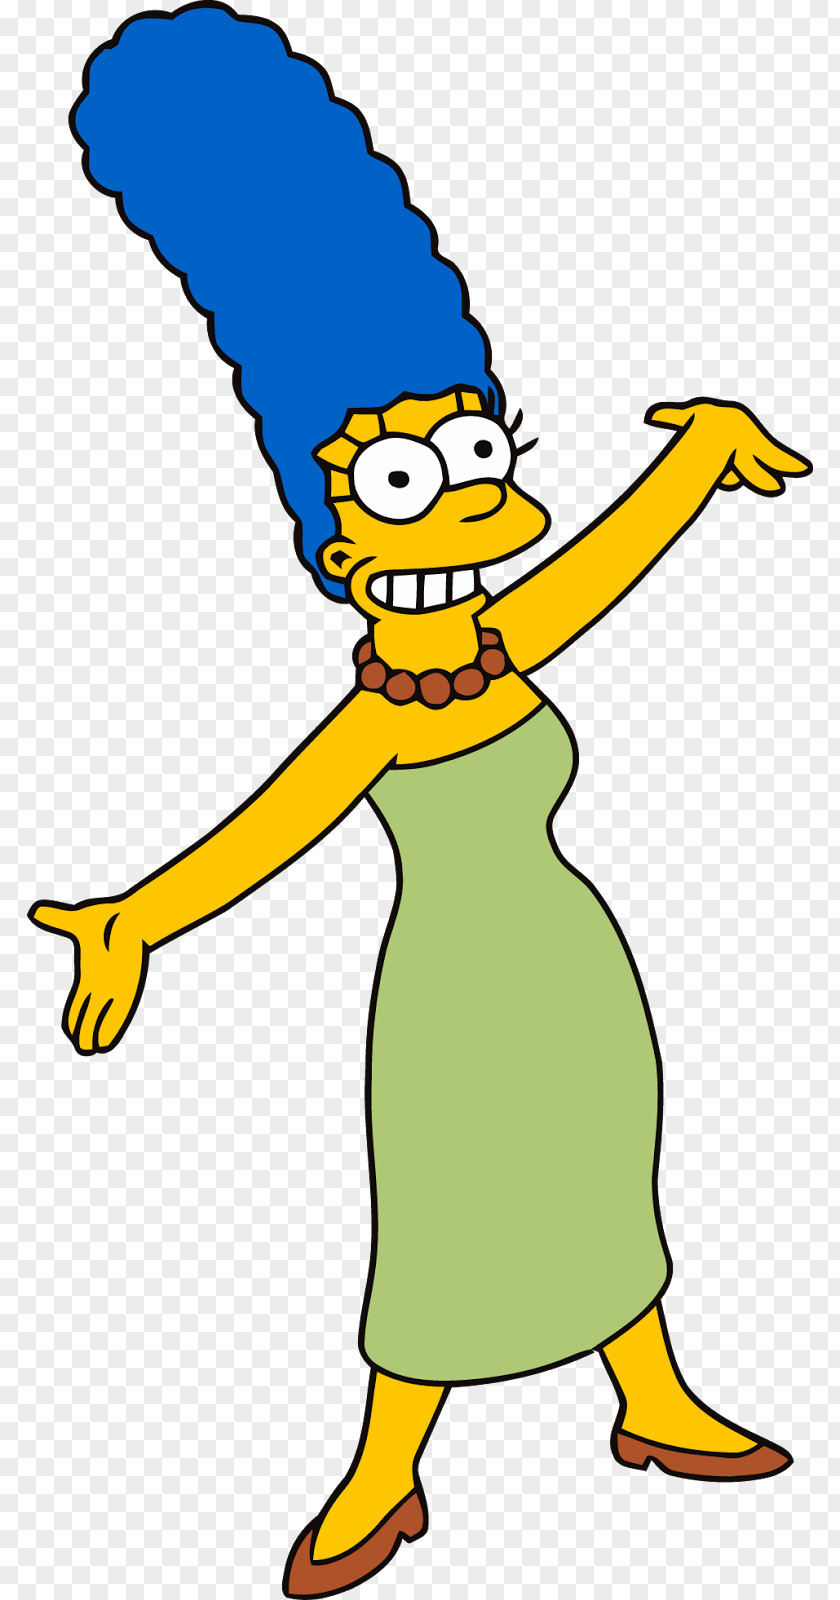 The Simpsons Marge Simpson Maggie Homer Lisa Bart PNG